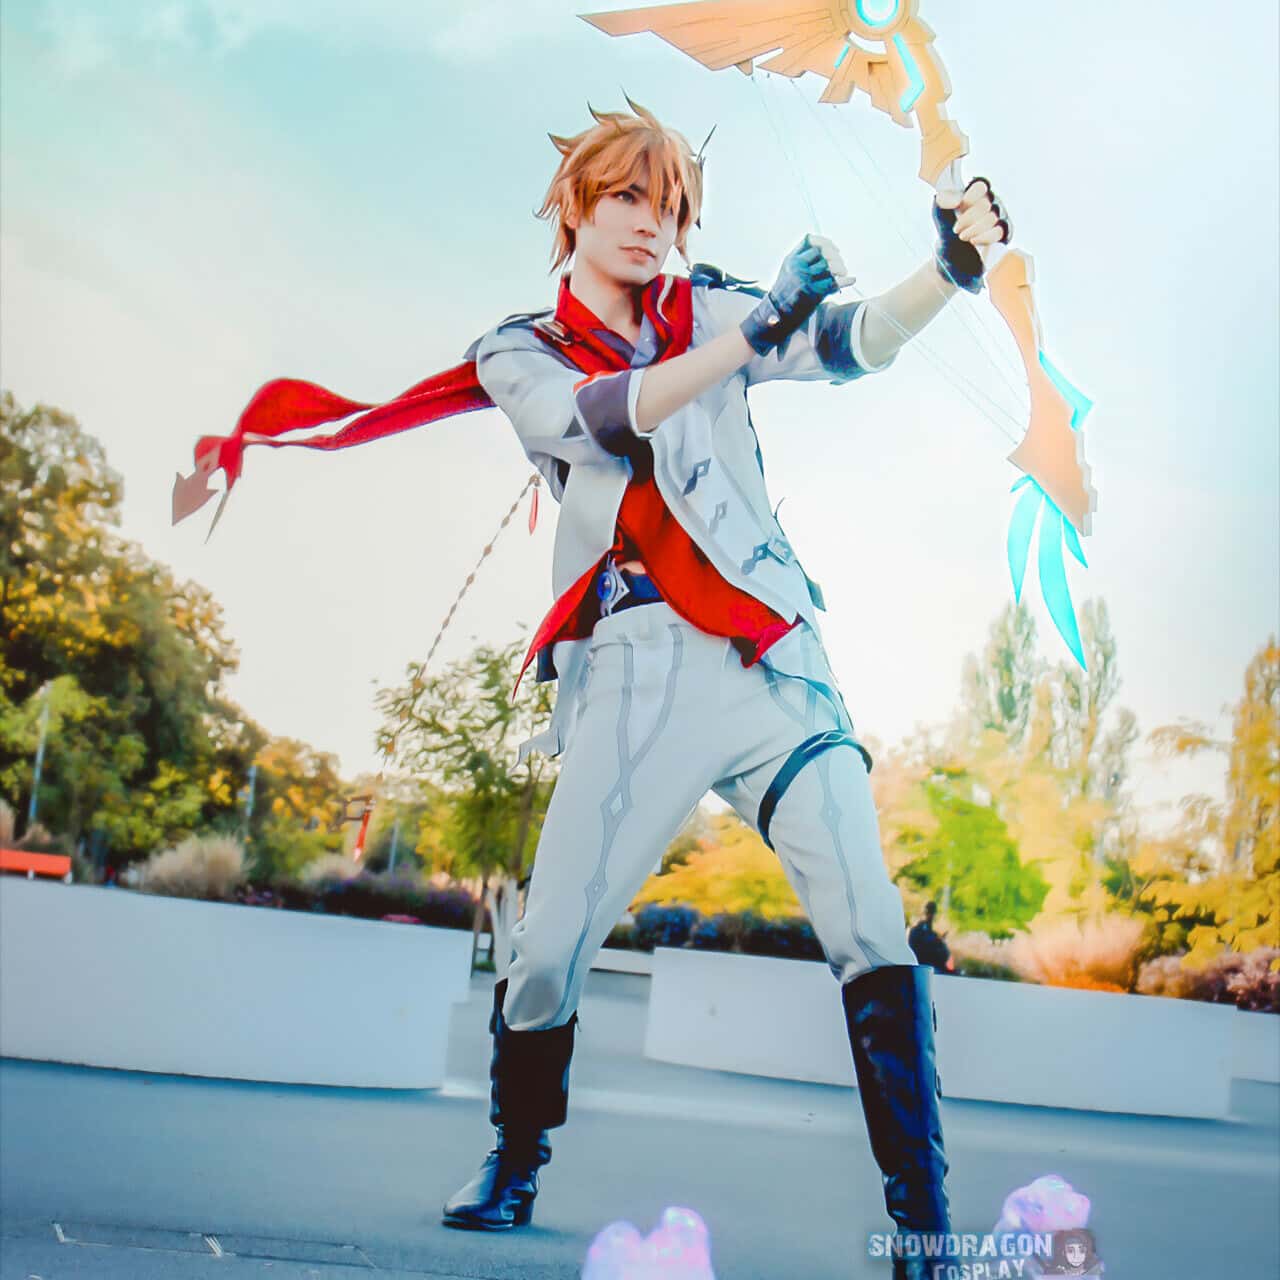 Turn Your Everyday Photos Into A Work Of Art With SnowDragons Cosplay Lightroom Edits uai